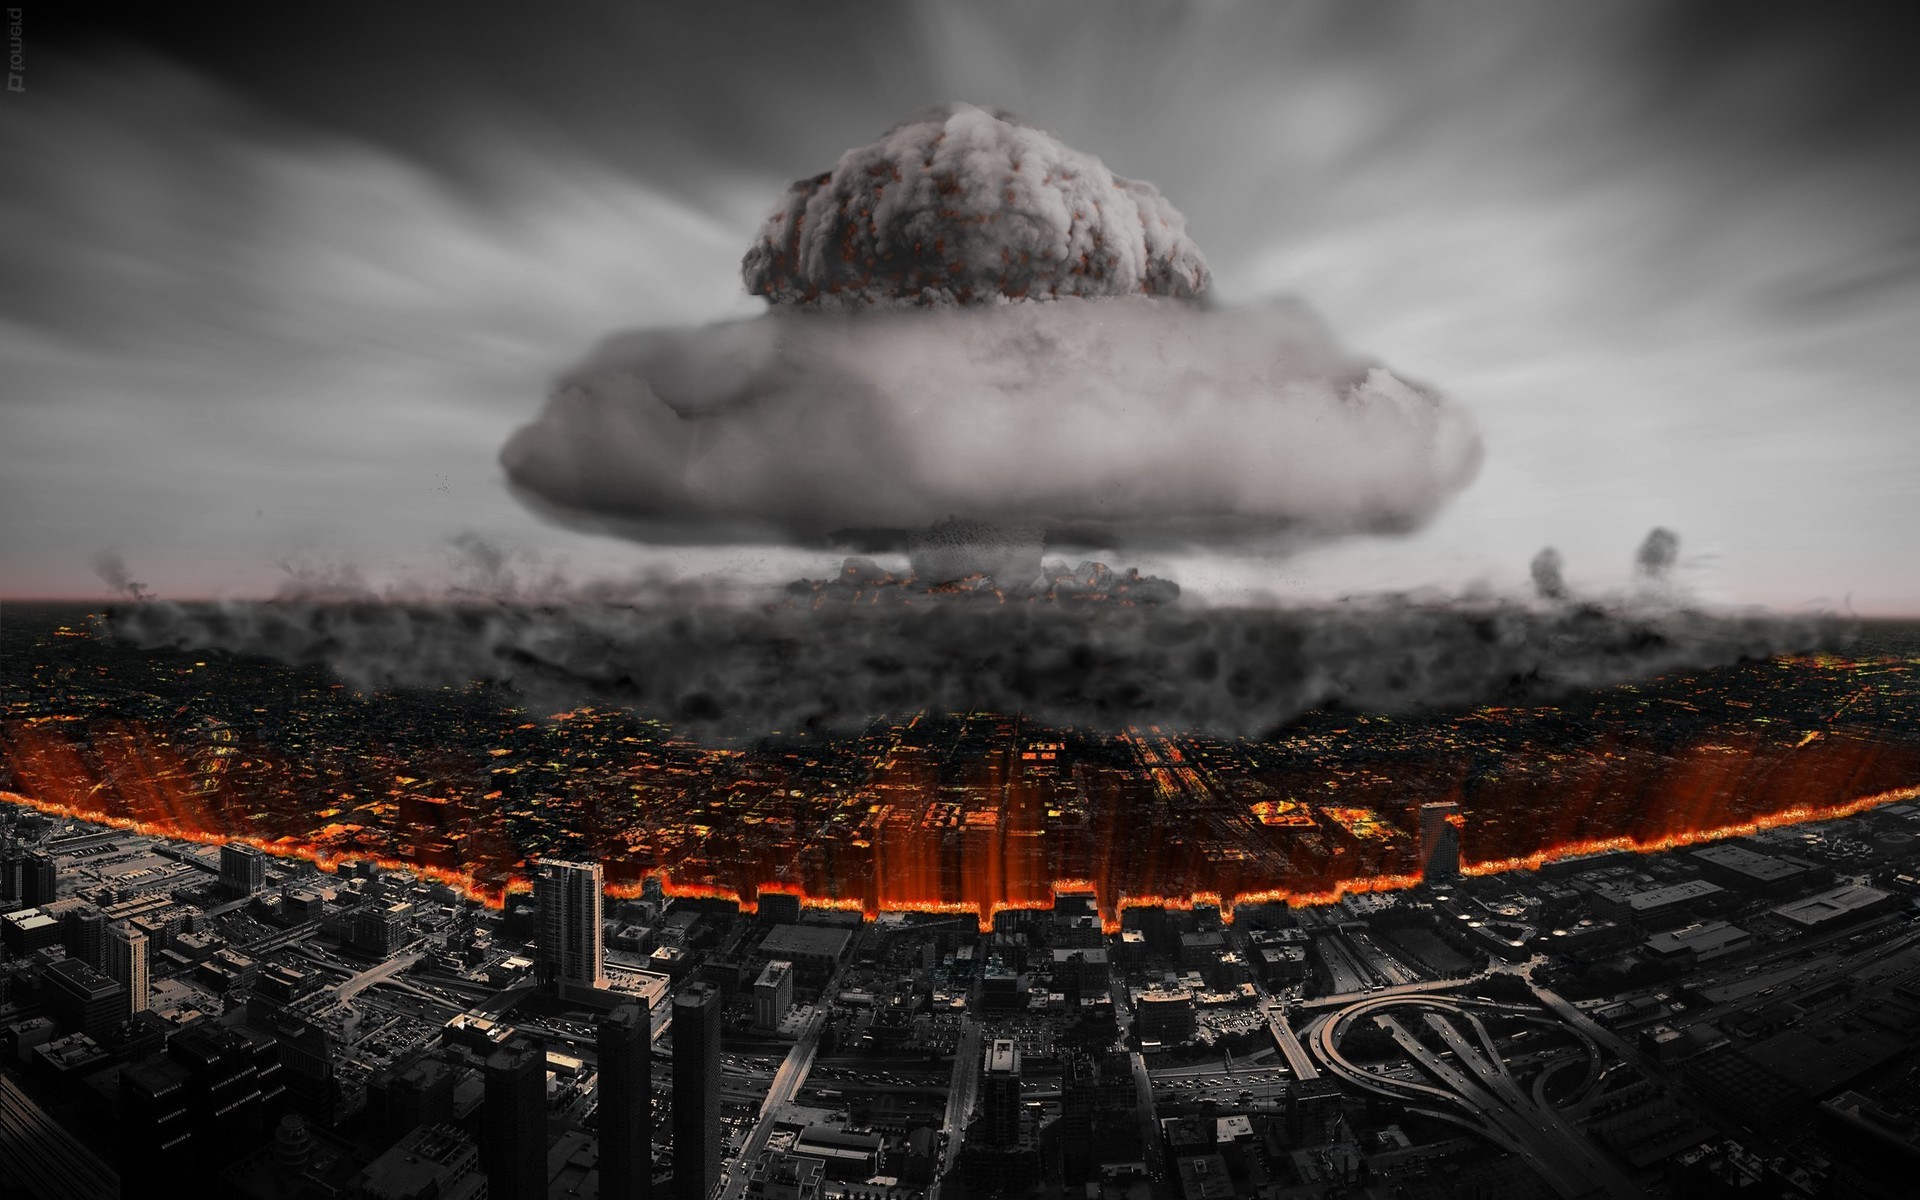 1920x1200 explosion bomb resolution 2560x1600 date 13 10 15 downloads 8677 